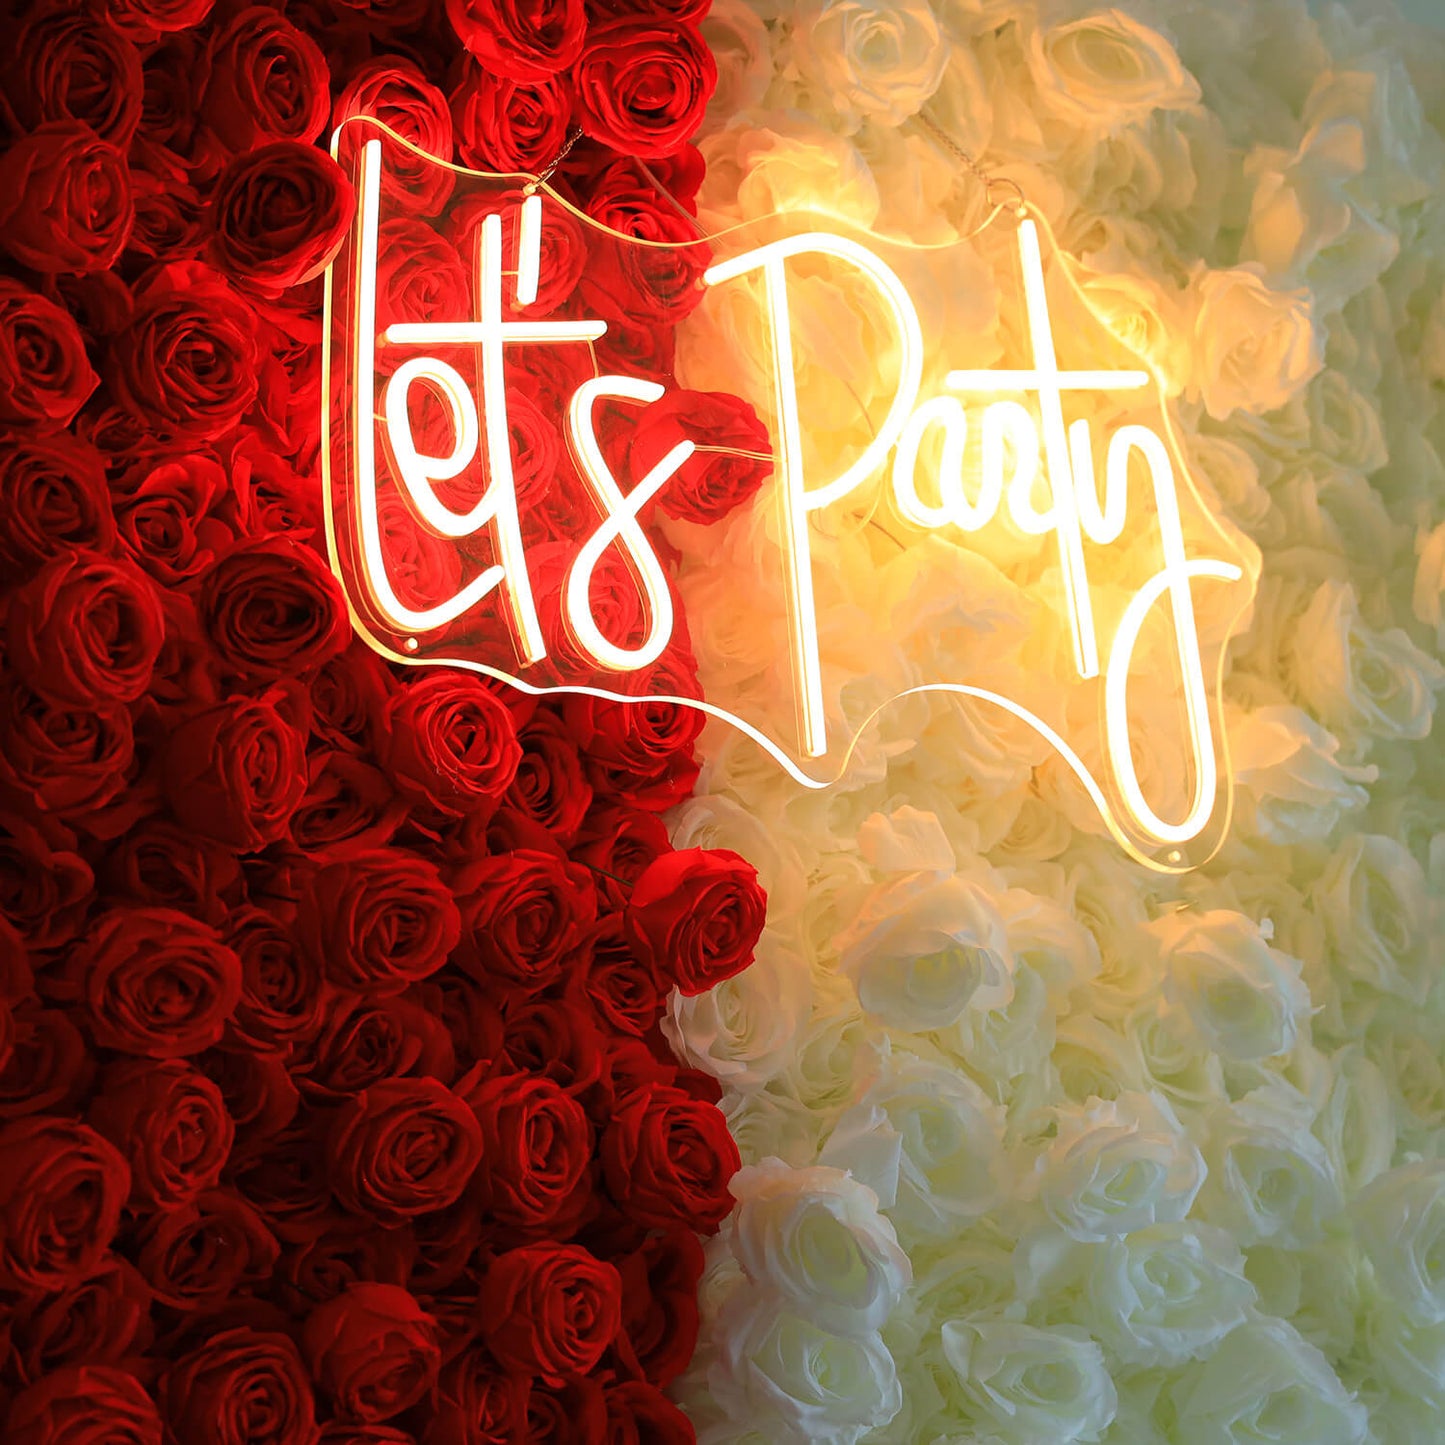 Let's Party LED Neon Sign Resuable Party Decoration Backdrop-ubackdrop